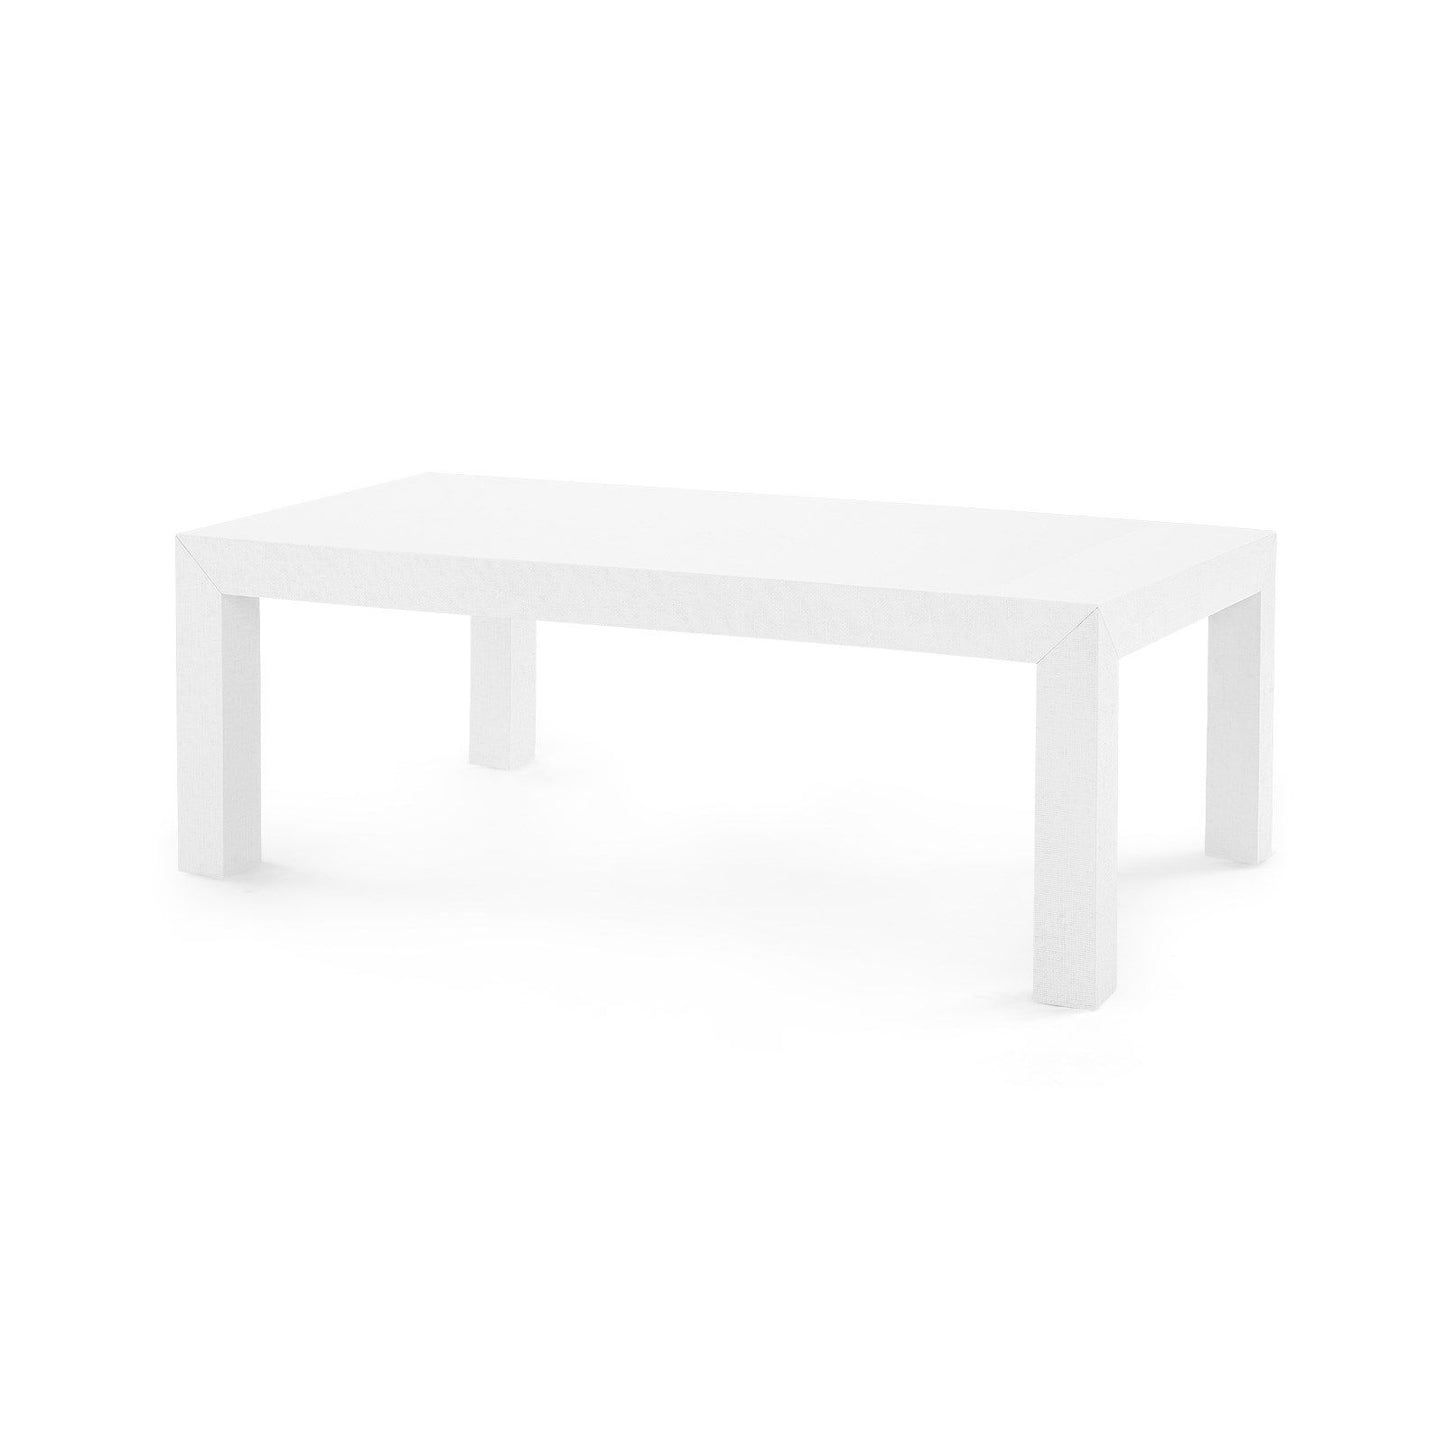 Parsons Coffee Table WhiteTable Bungalow 5  White   Four Hands, Burke Decor, Mid Century Modern Furniture, Old Bones Furniture Company, Old Bones Co, Modern Mid Century, Designer Furniture, https://www.oldbonesco.com/